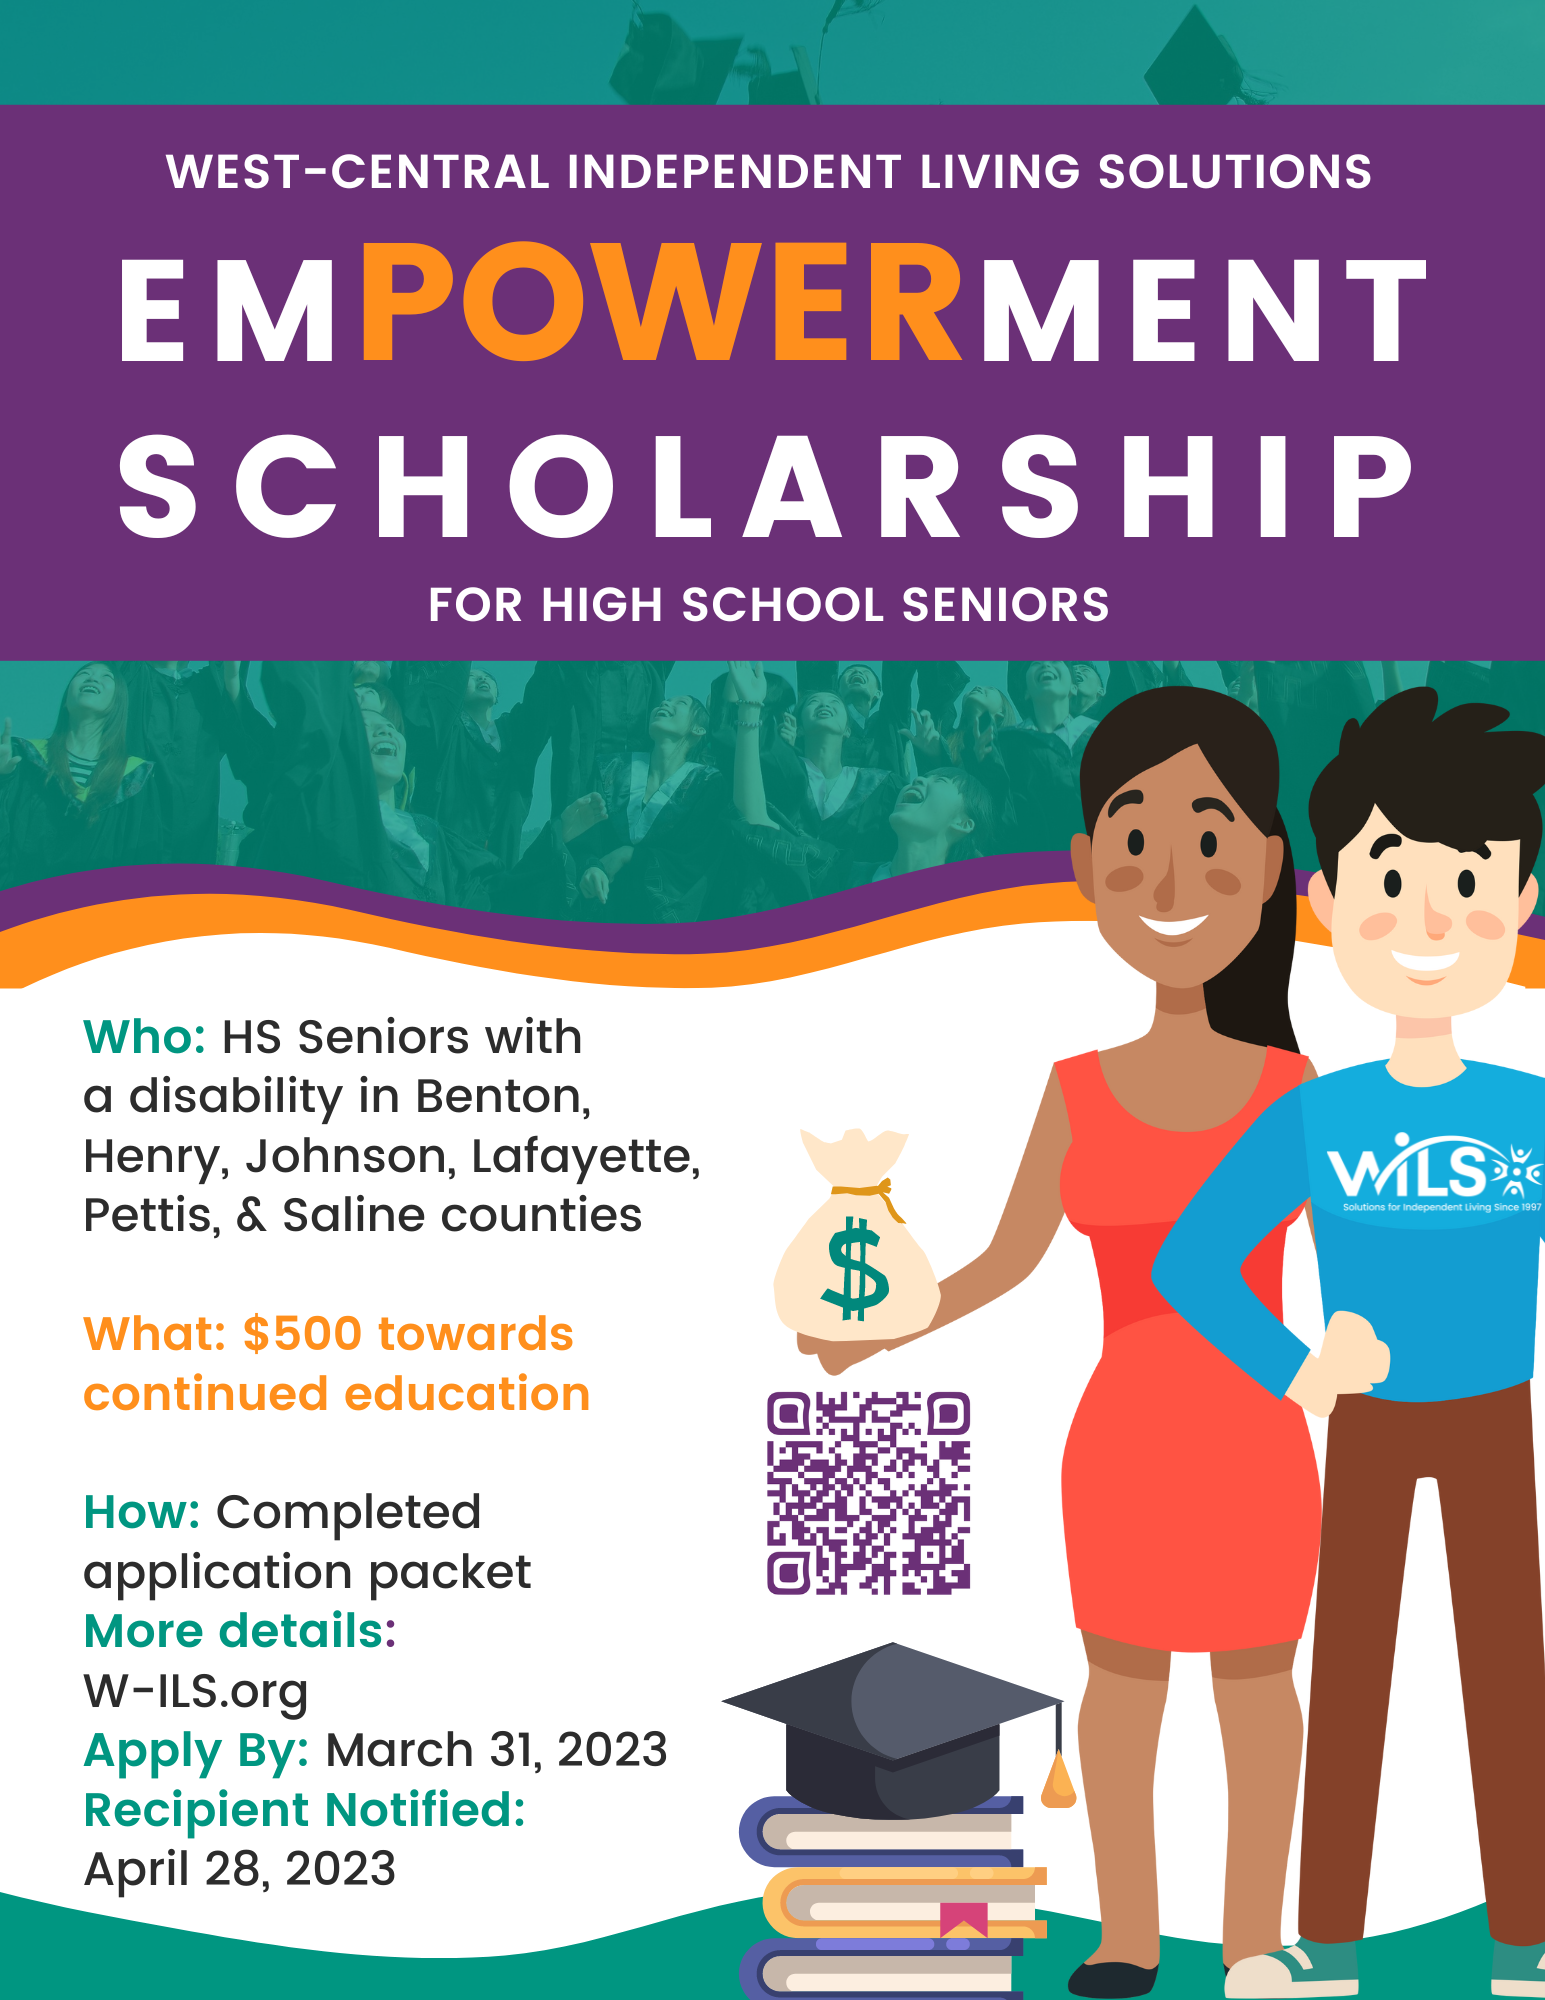 WILS Youth Empowerment Scholarship for High School Seniors. Who: High School Seniors with a disability in Benton, Henry, Johnson, Lafayette, Pettis, & Saline counties What: $500 towards continued education How: Completed application packet More details: W-ILS.org Apply By: March 31, 2023 Recipient Notified: April 28, 2023